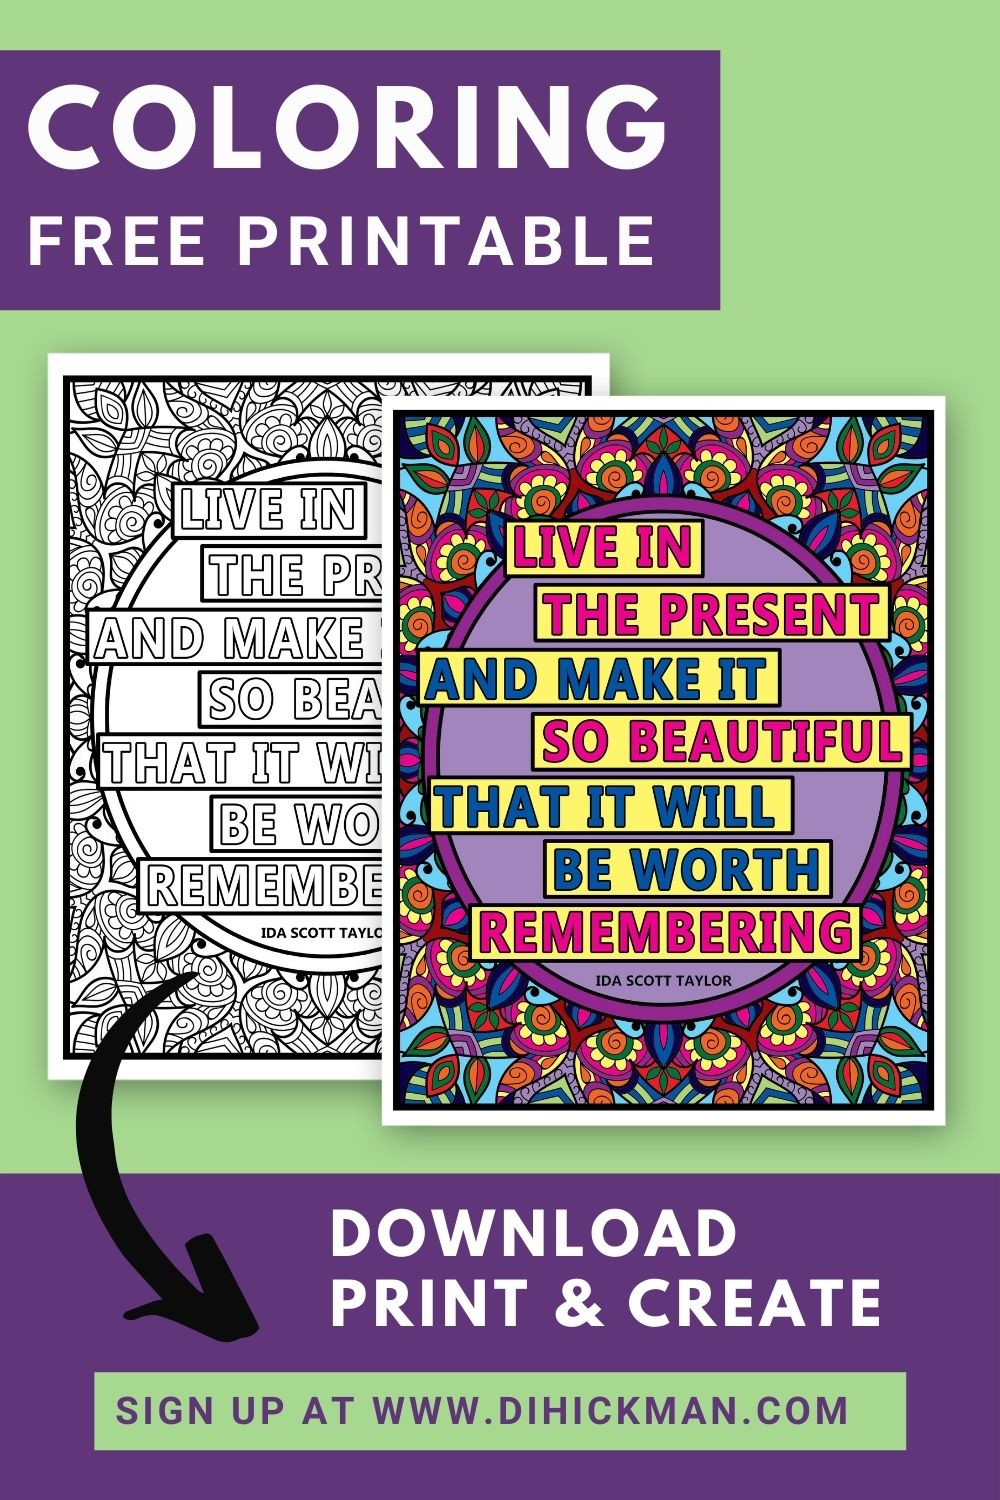 Coloring free printable. live in the present and make it so beautiful that it will be worth remembering. Download print & create.